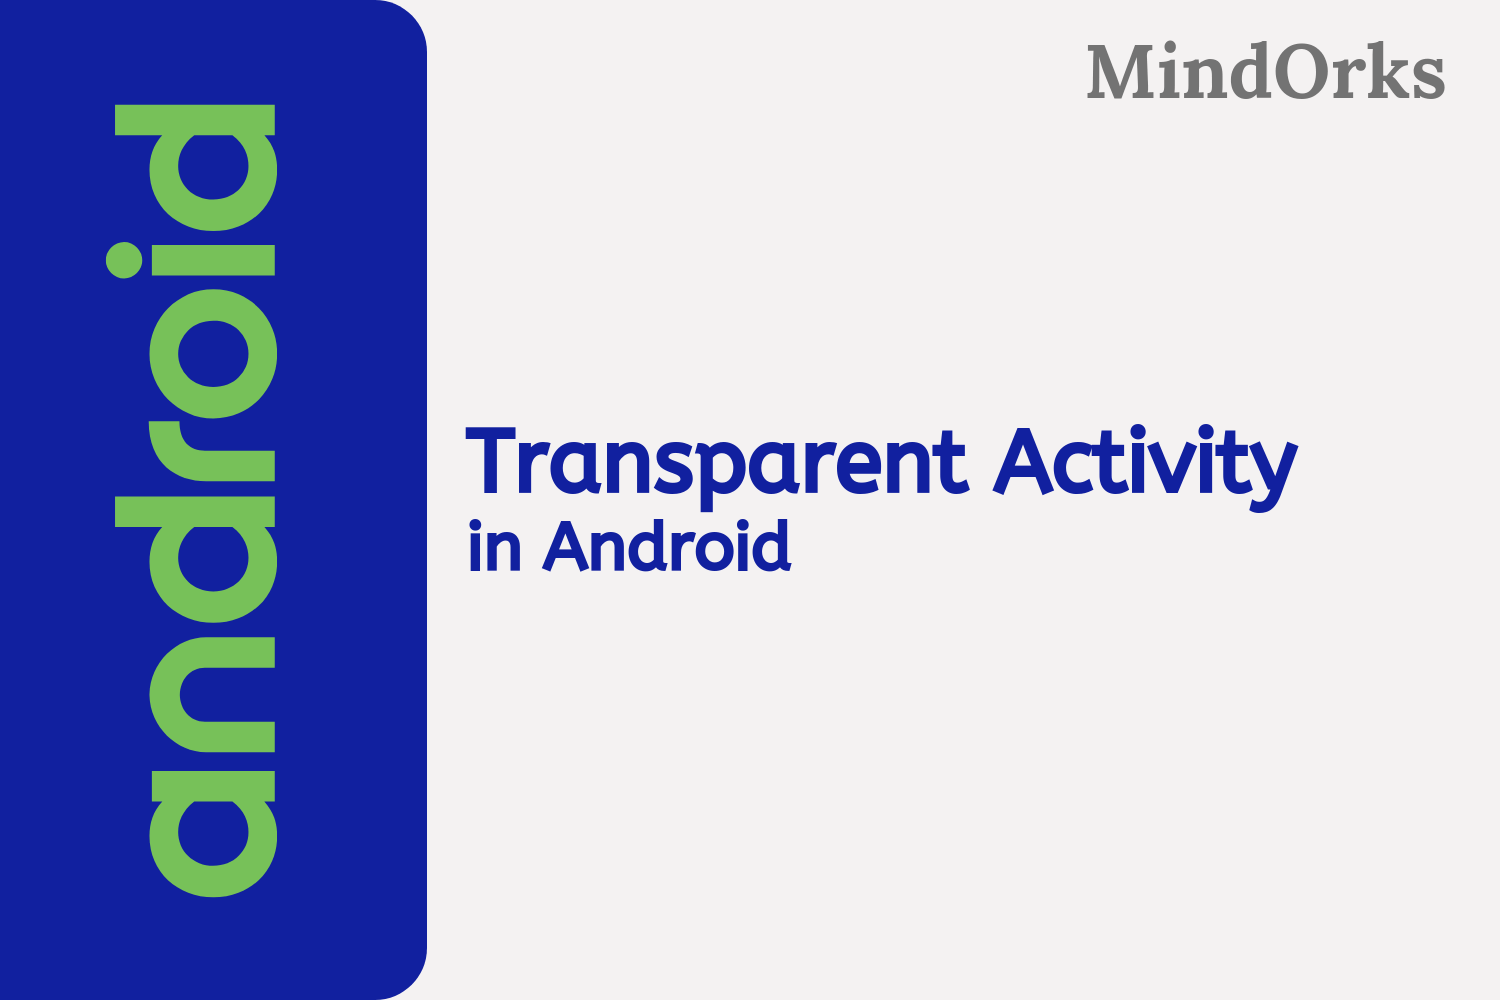 How to create a Transparent Activity in Android?